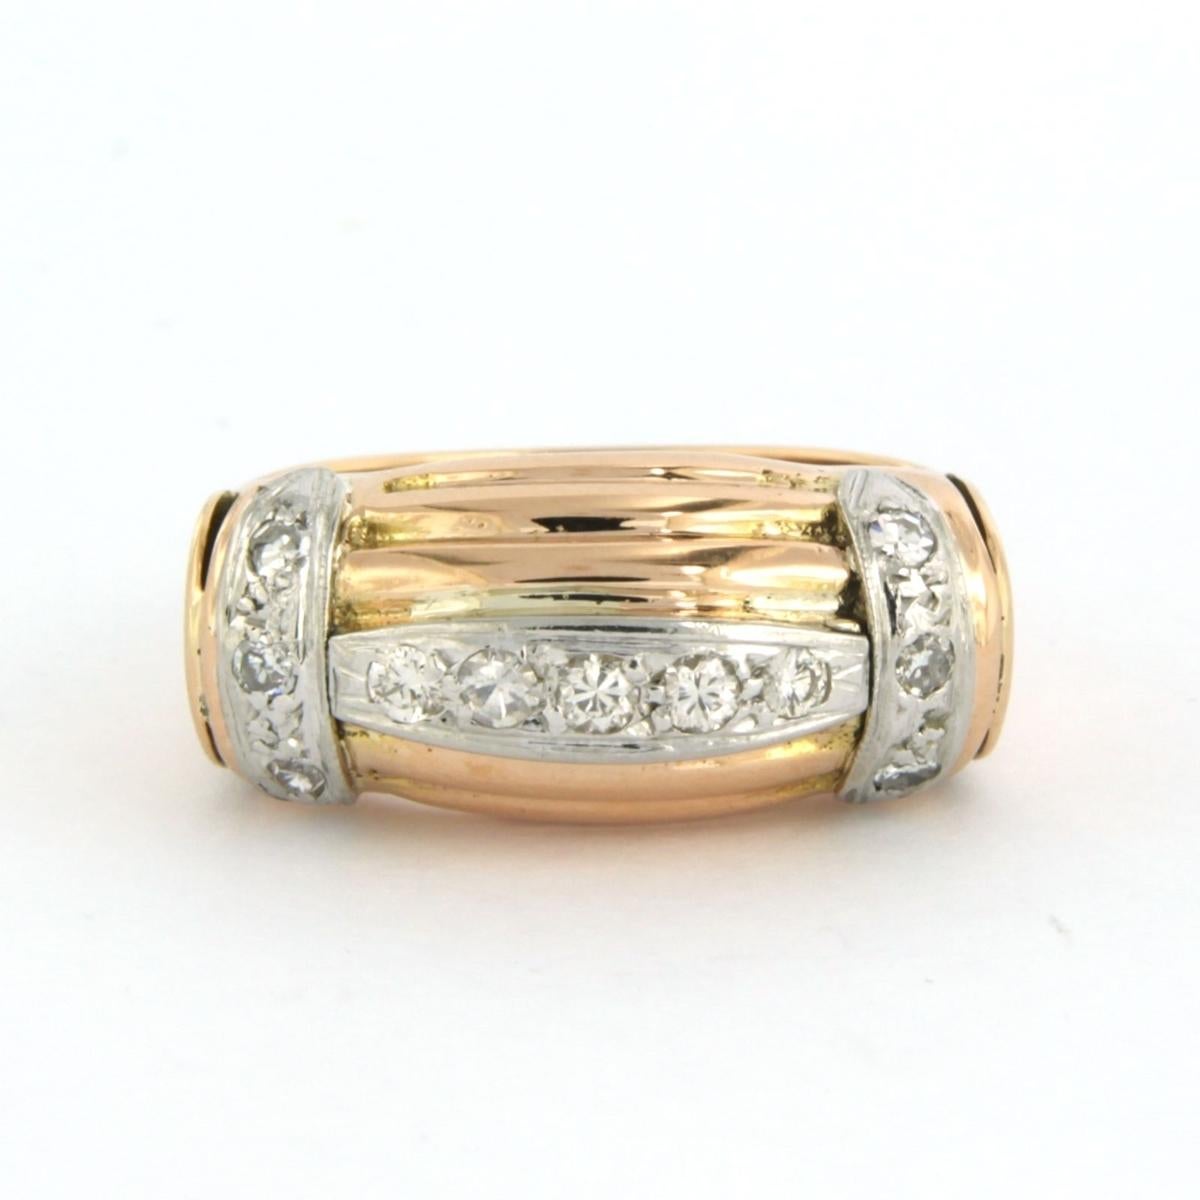 18 kt bicolor gold ring set with brilliant cut and single cut diamonds. 0.20 ct - F/G - VS/SI - ring size U.S. 7.25 - EU. 17.5(55)

detailed description:

the top of the ring is 1.0 cm wide

Ring size U.S. 7.25 - EU. 17.5(55), ring can be enlarged